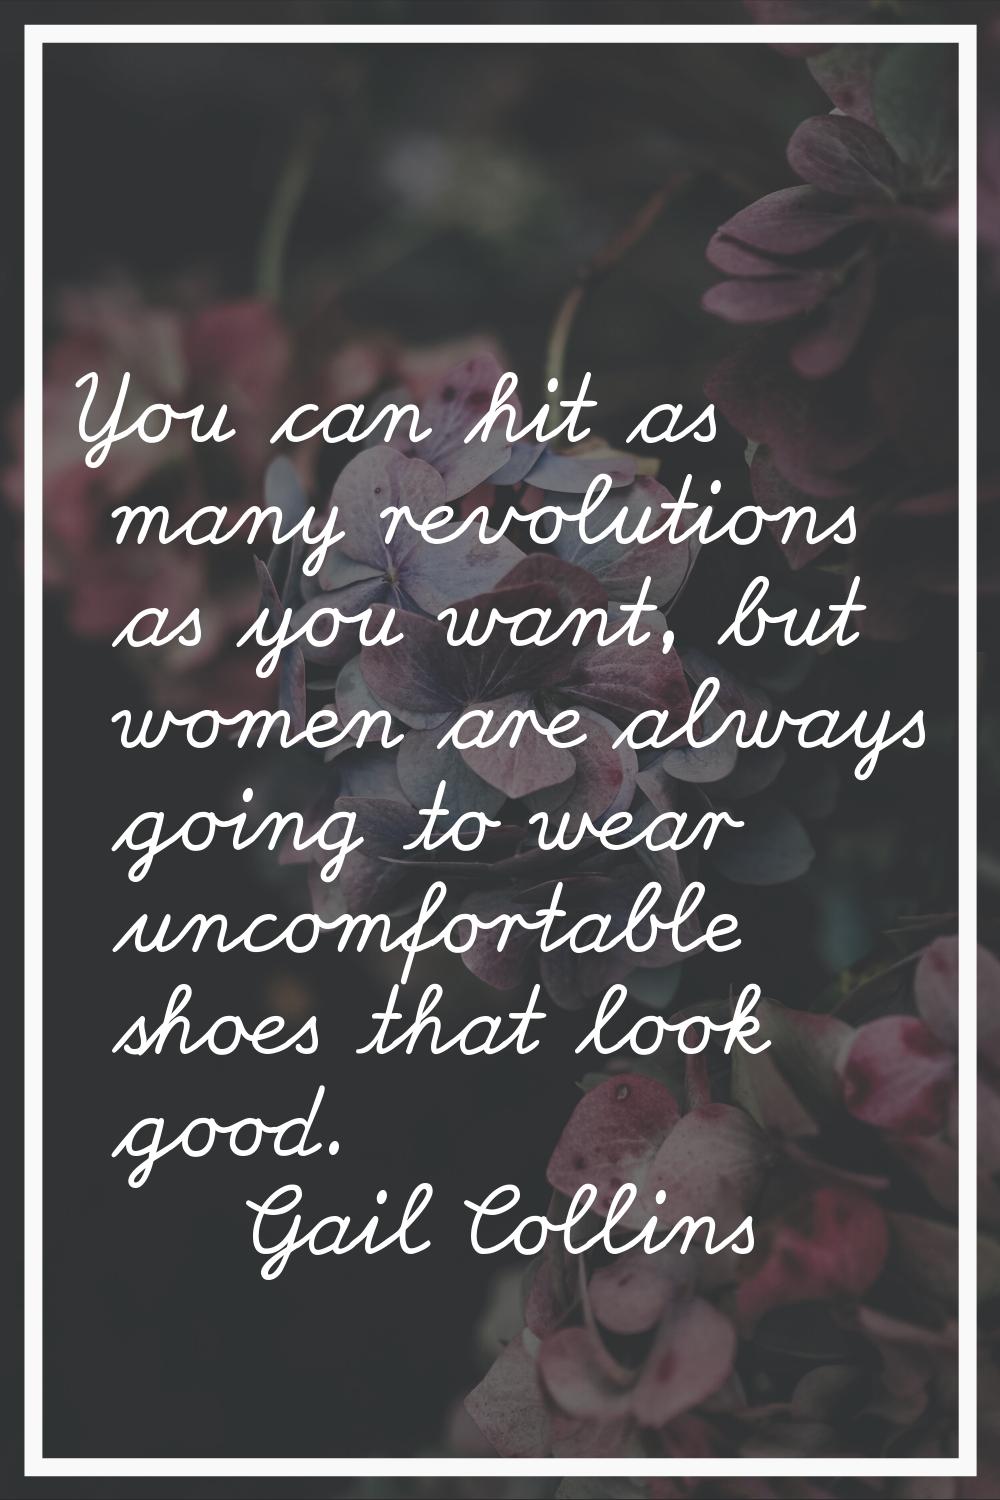 You can hit as many revolutions as you want, but women are always going to wear uncomfortable shoes